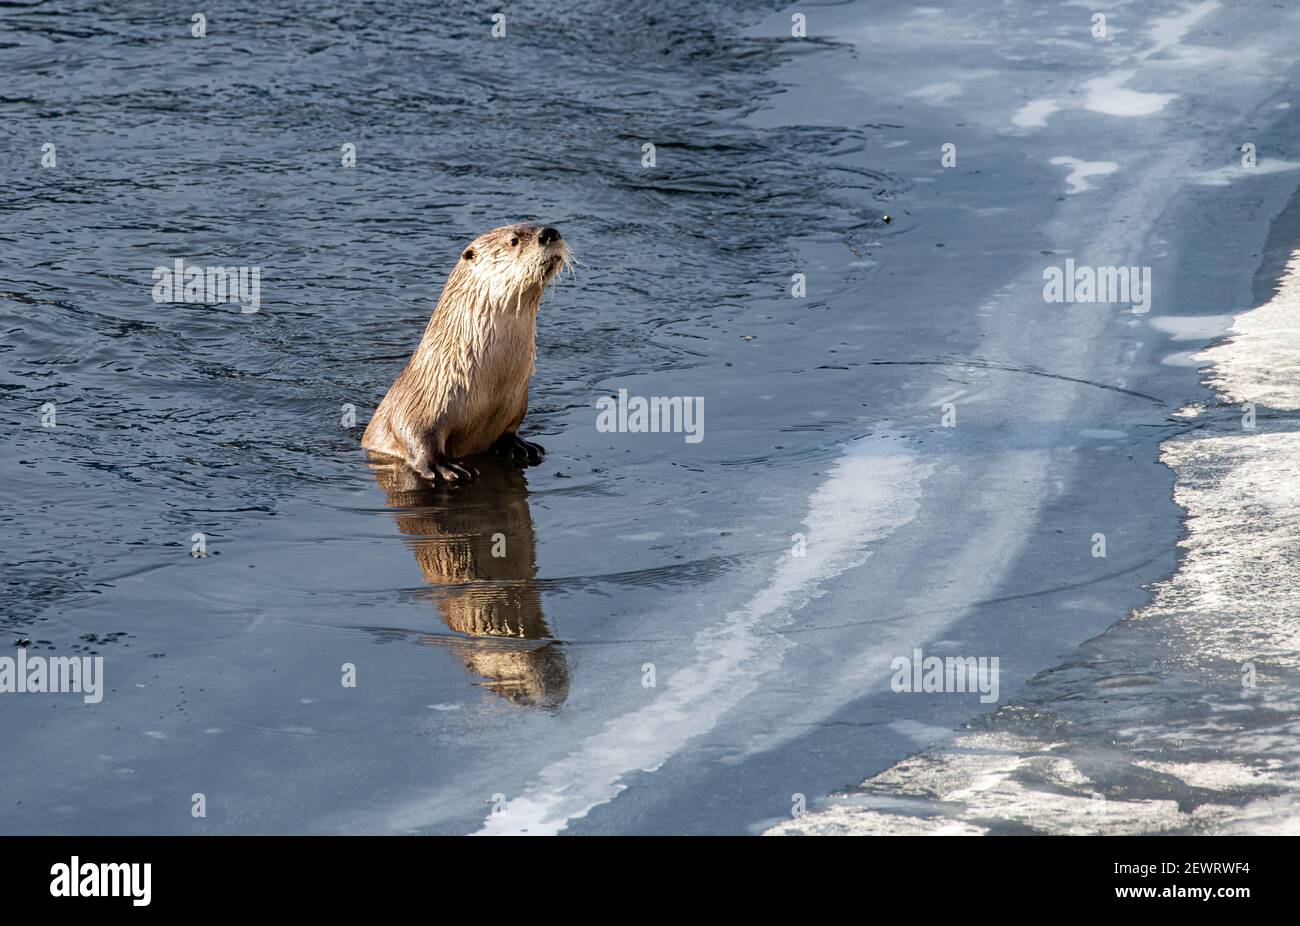 River otter (Lontra canadensis), peering over ice, with reflection, Yellowstone National Park, UNESCO World Heritage Site, Wyoming Stock Photo